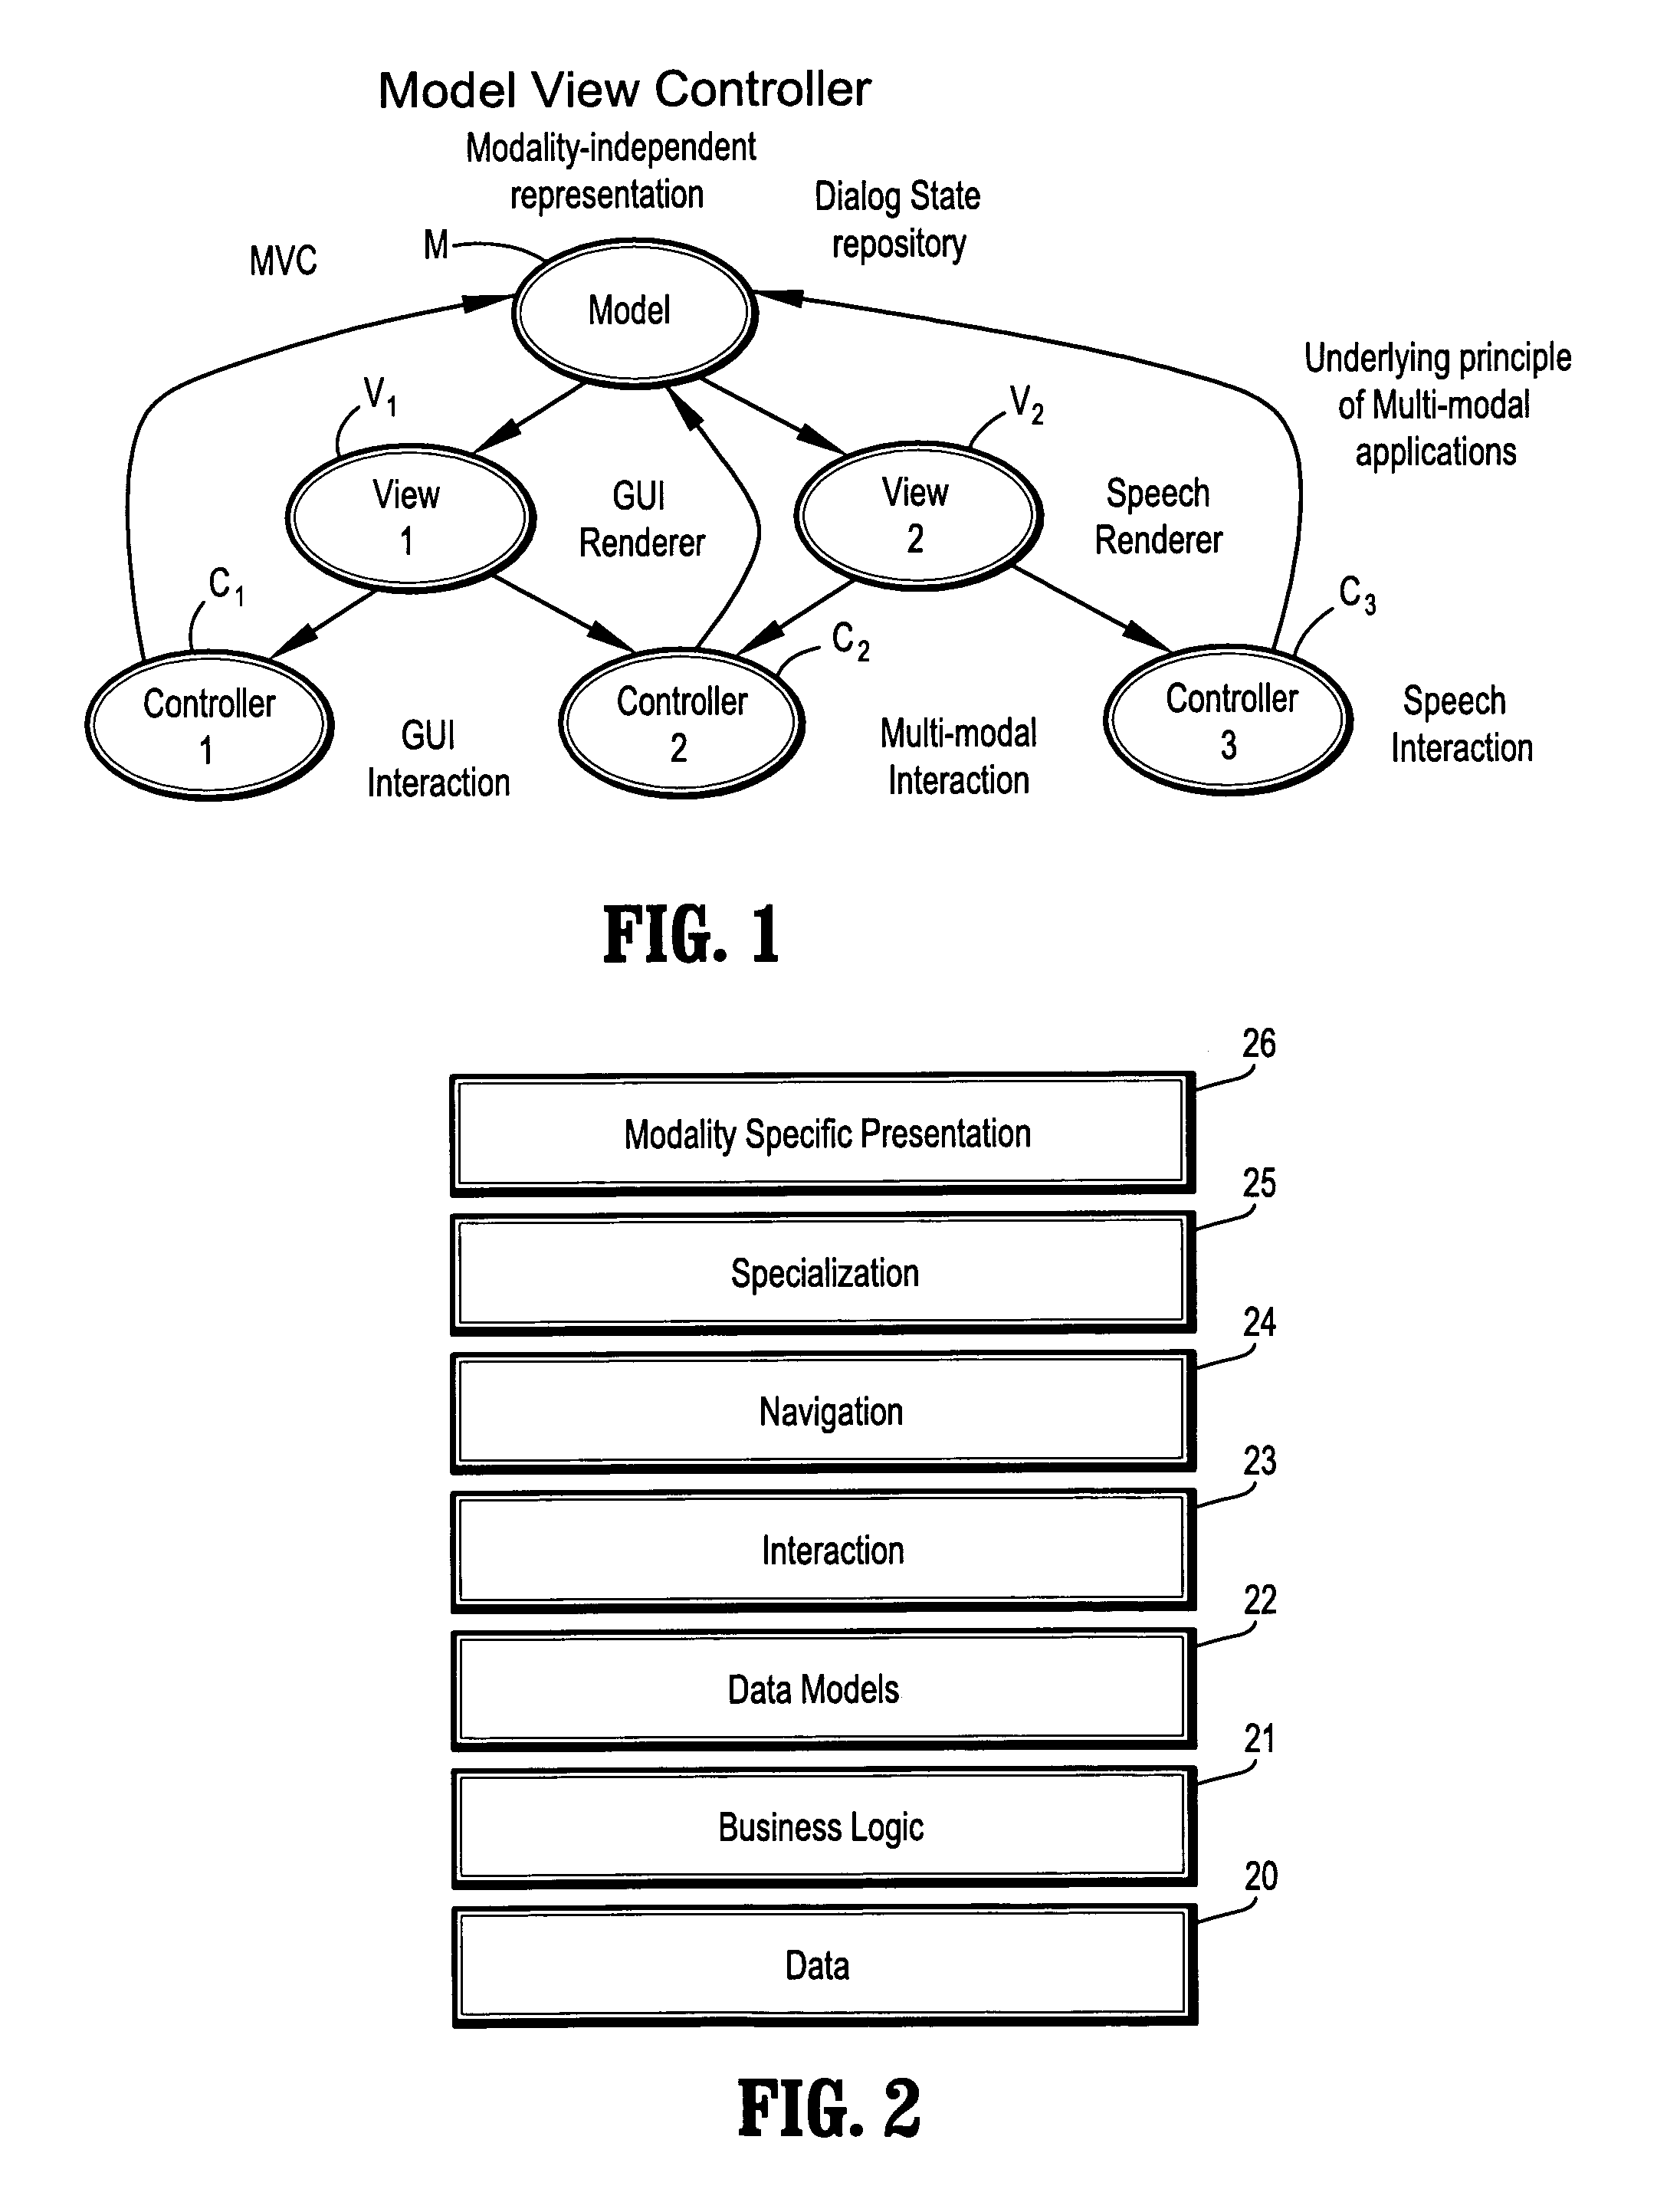 Systems and methods for implementing modular DOM (Document Object Model)-based multi-modal browsers